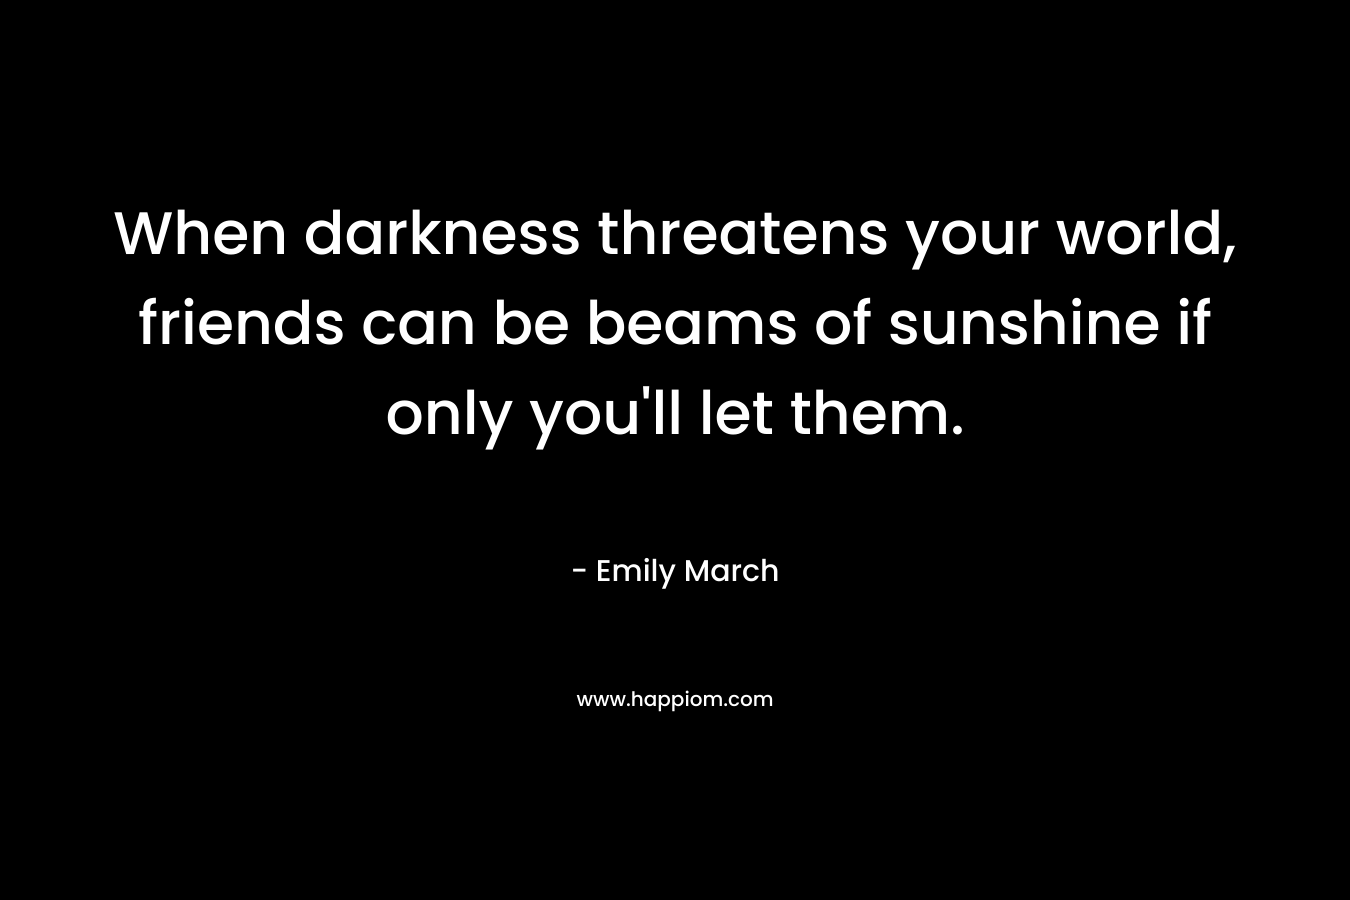 When darkness threatens your world, friends can be beams of sunshine if only you’ll let them. – Emily March